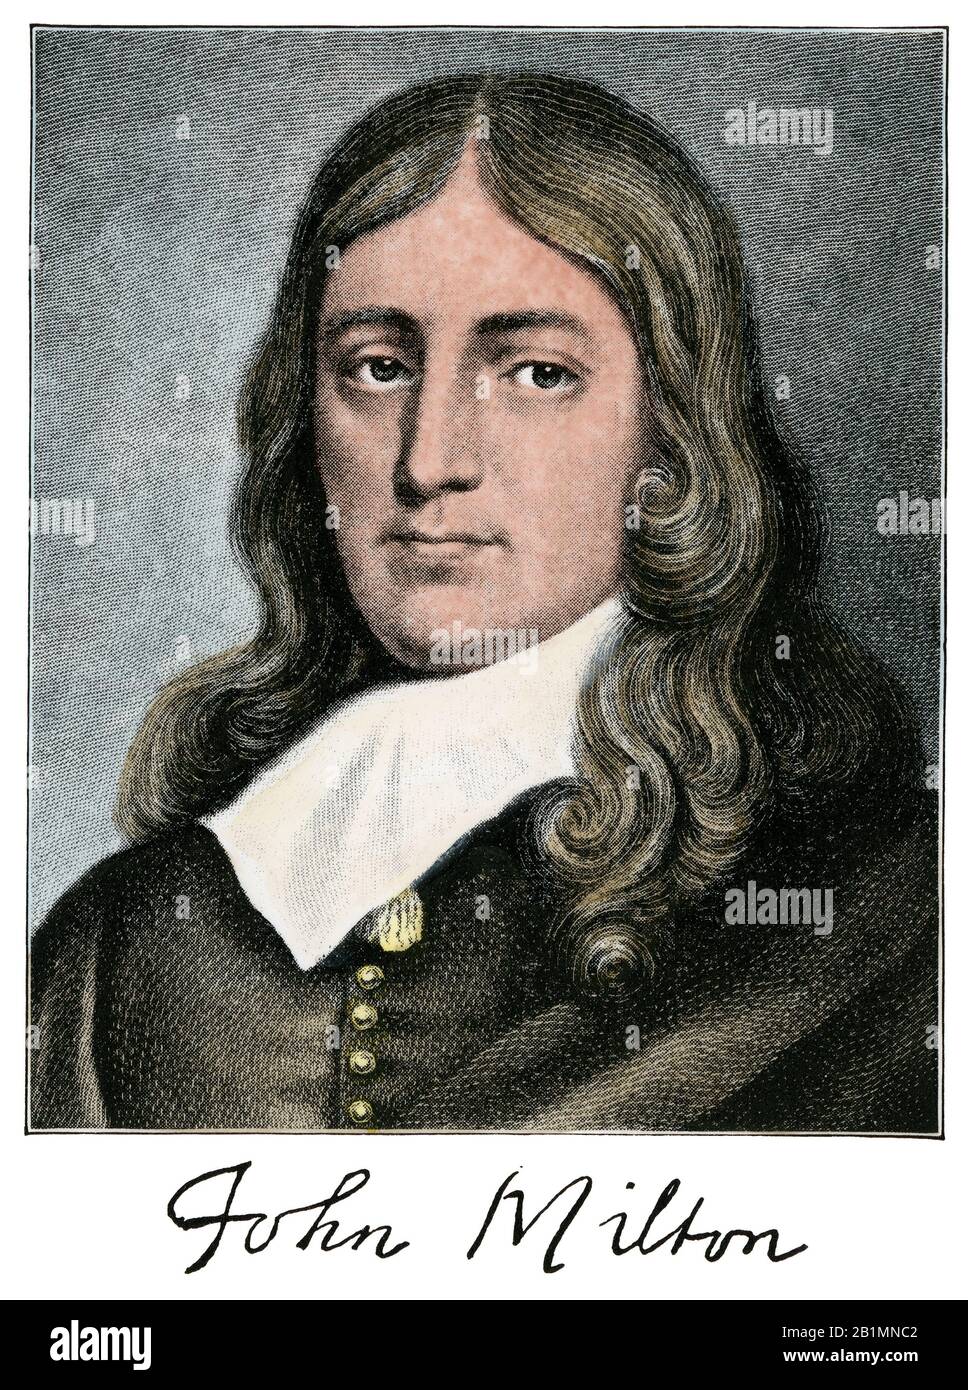 John Milton, with his signature. Hand-colored halftone of an illustration Stock Photo